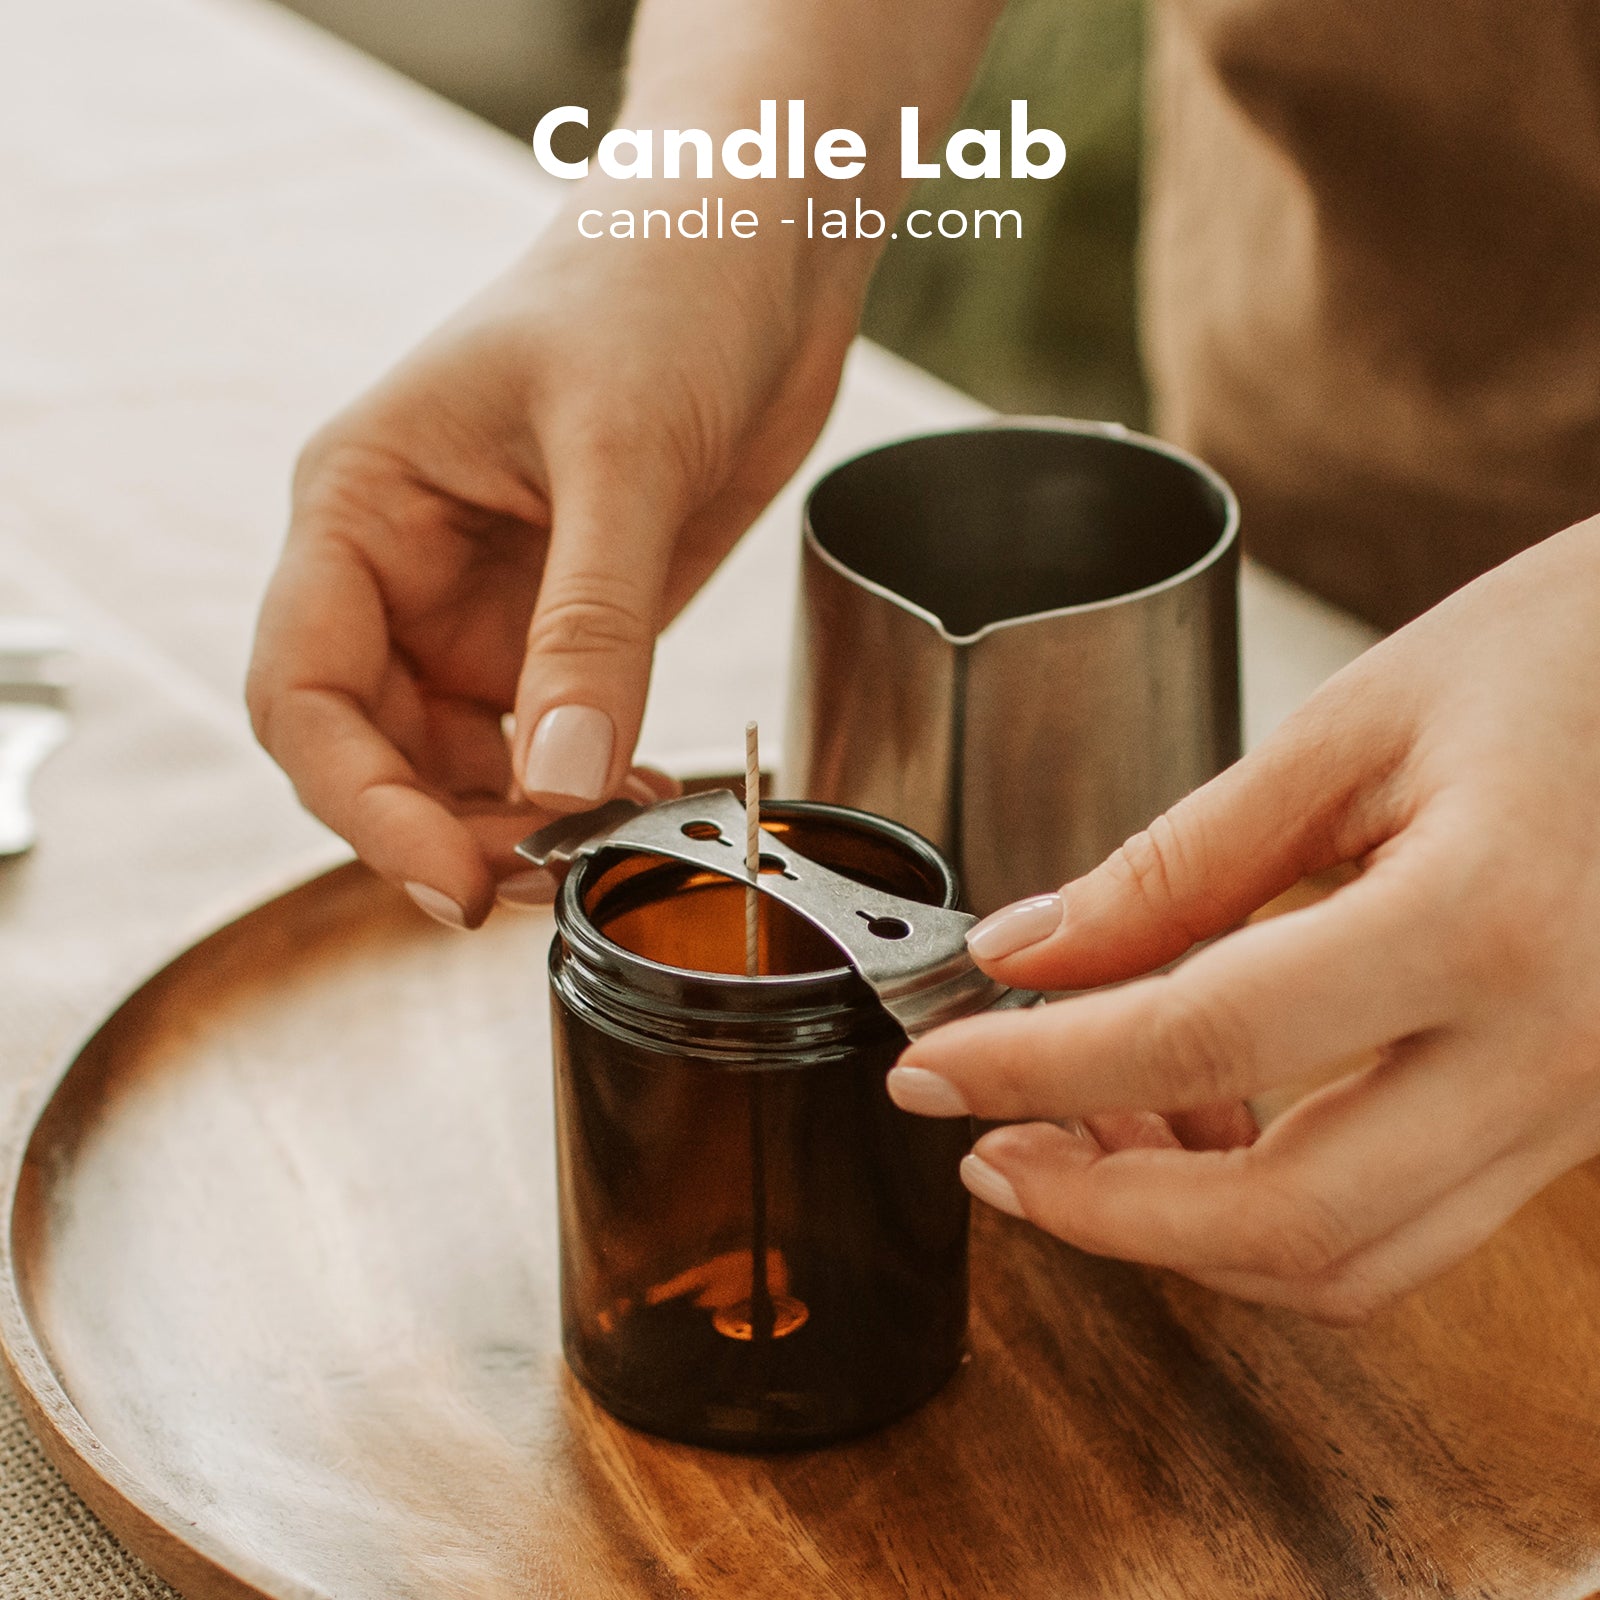 Methods used for centering wicks - General Candle Making